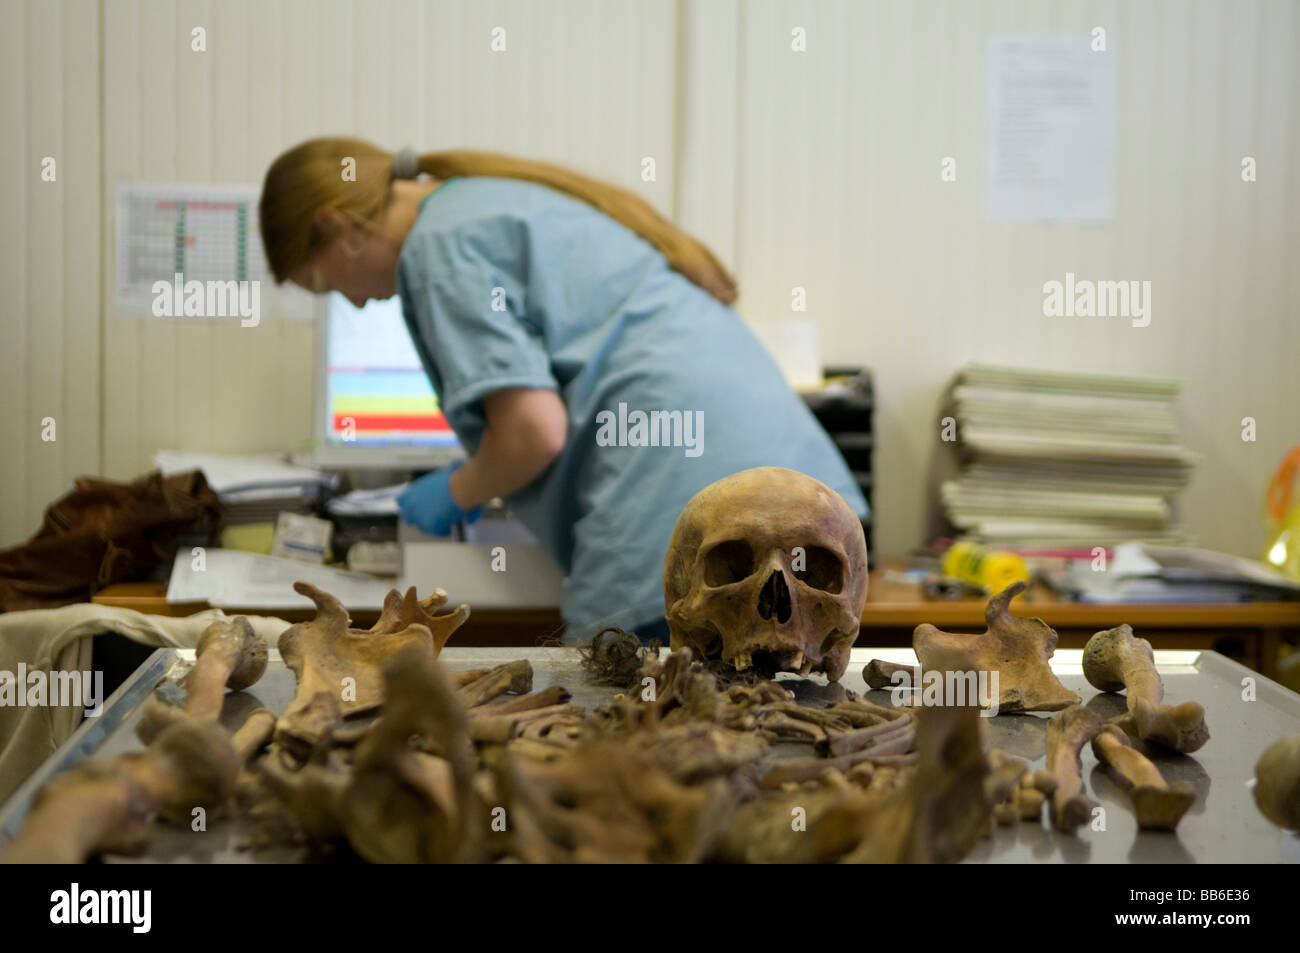 Forensic archaeologist examining a human skull at the mortuary facility of ICMP commission of missing persons from the Bosnian war in Lukavac, Bosnia Stock Photo